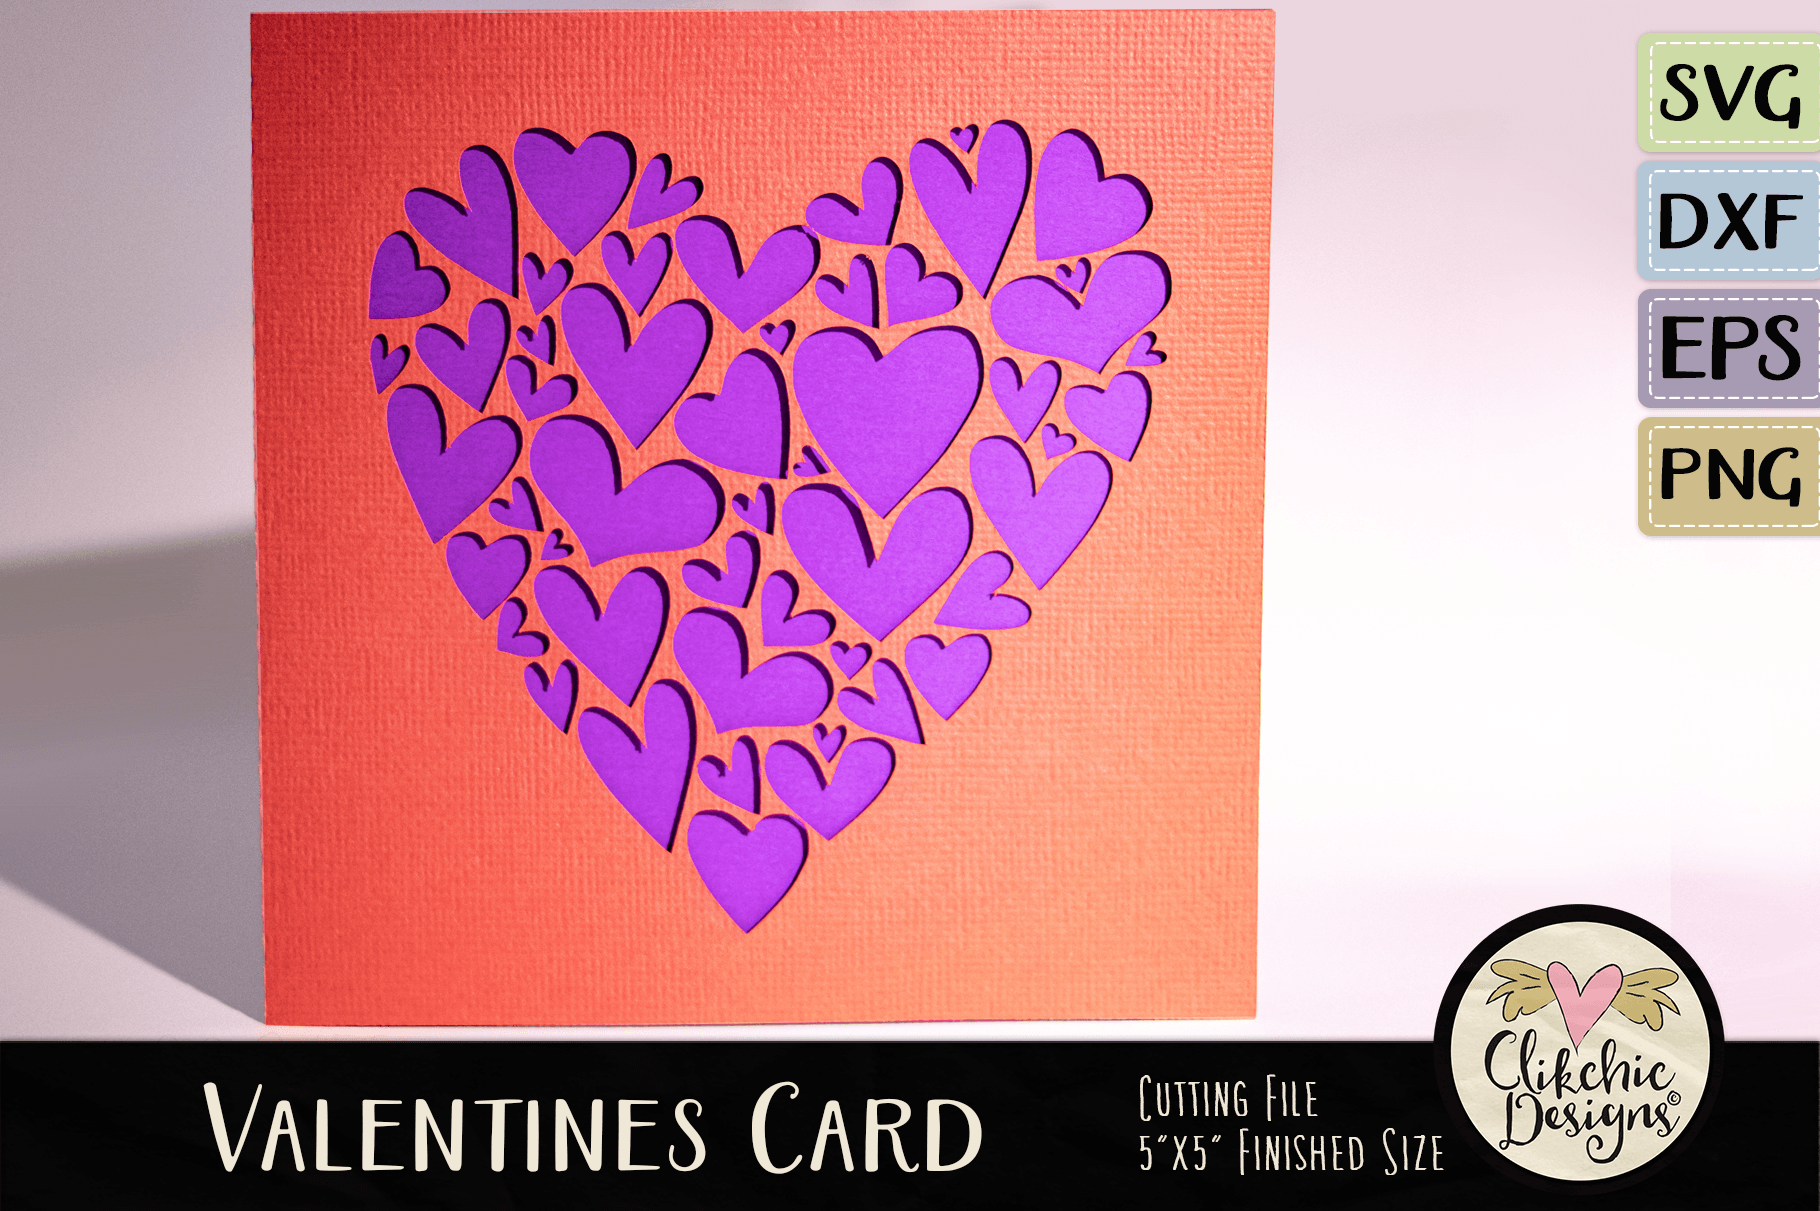 Valentine Hearts SVG Card Cutting File By Clikchic Designs